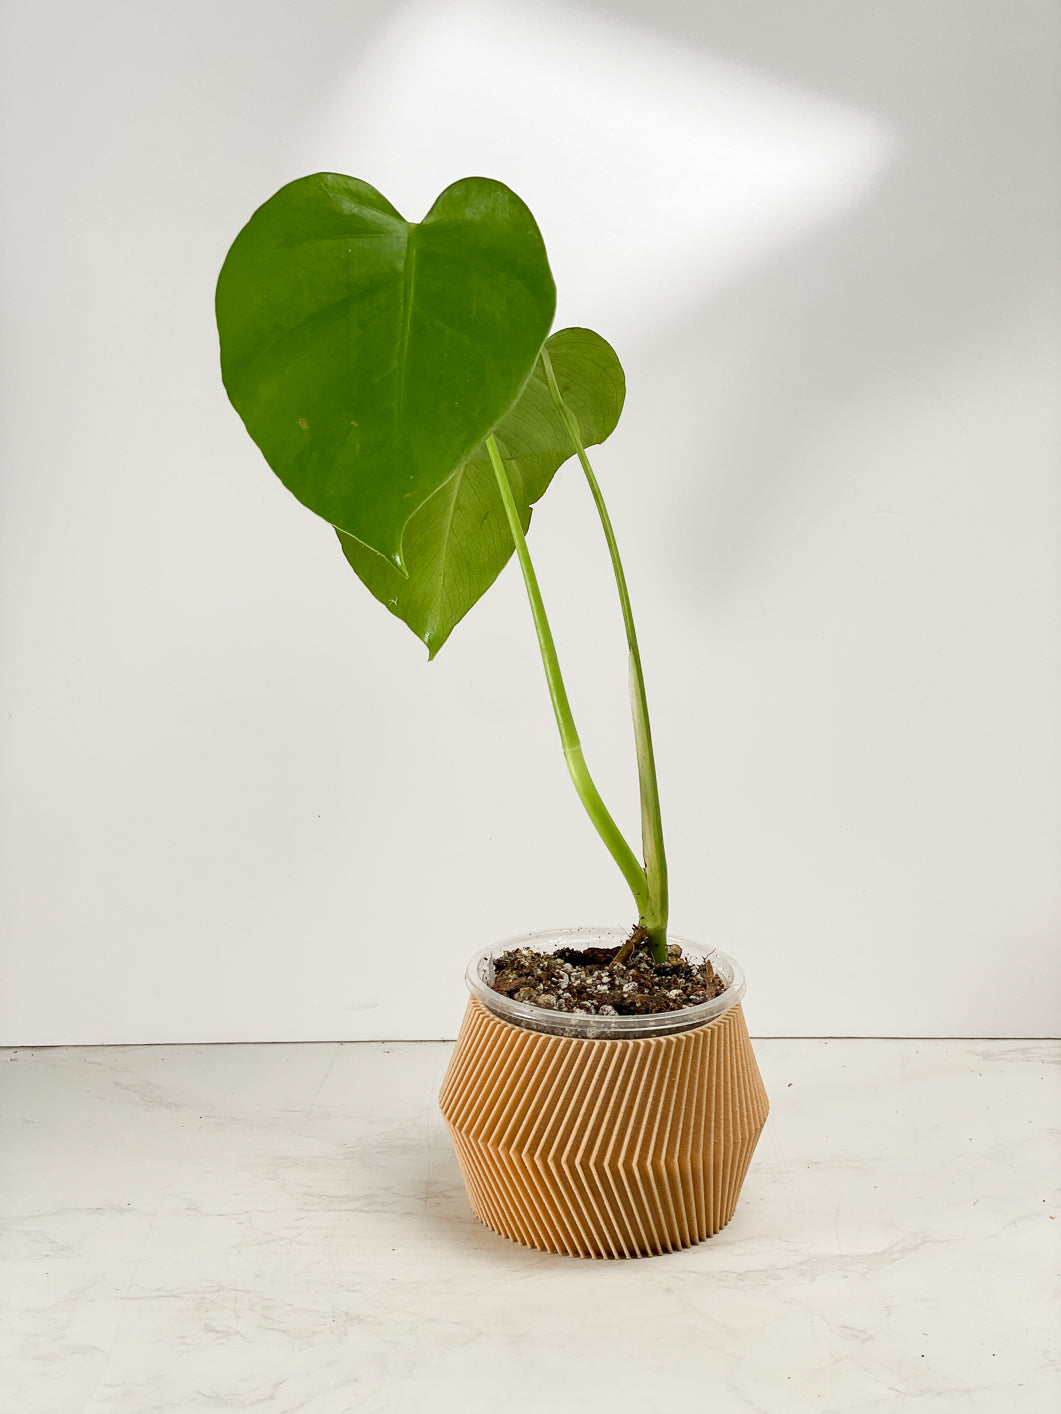 Monstera Sierrana Rooted 2 leaves Top Cutting